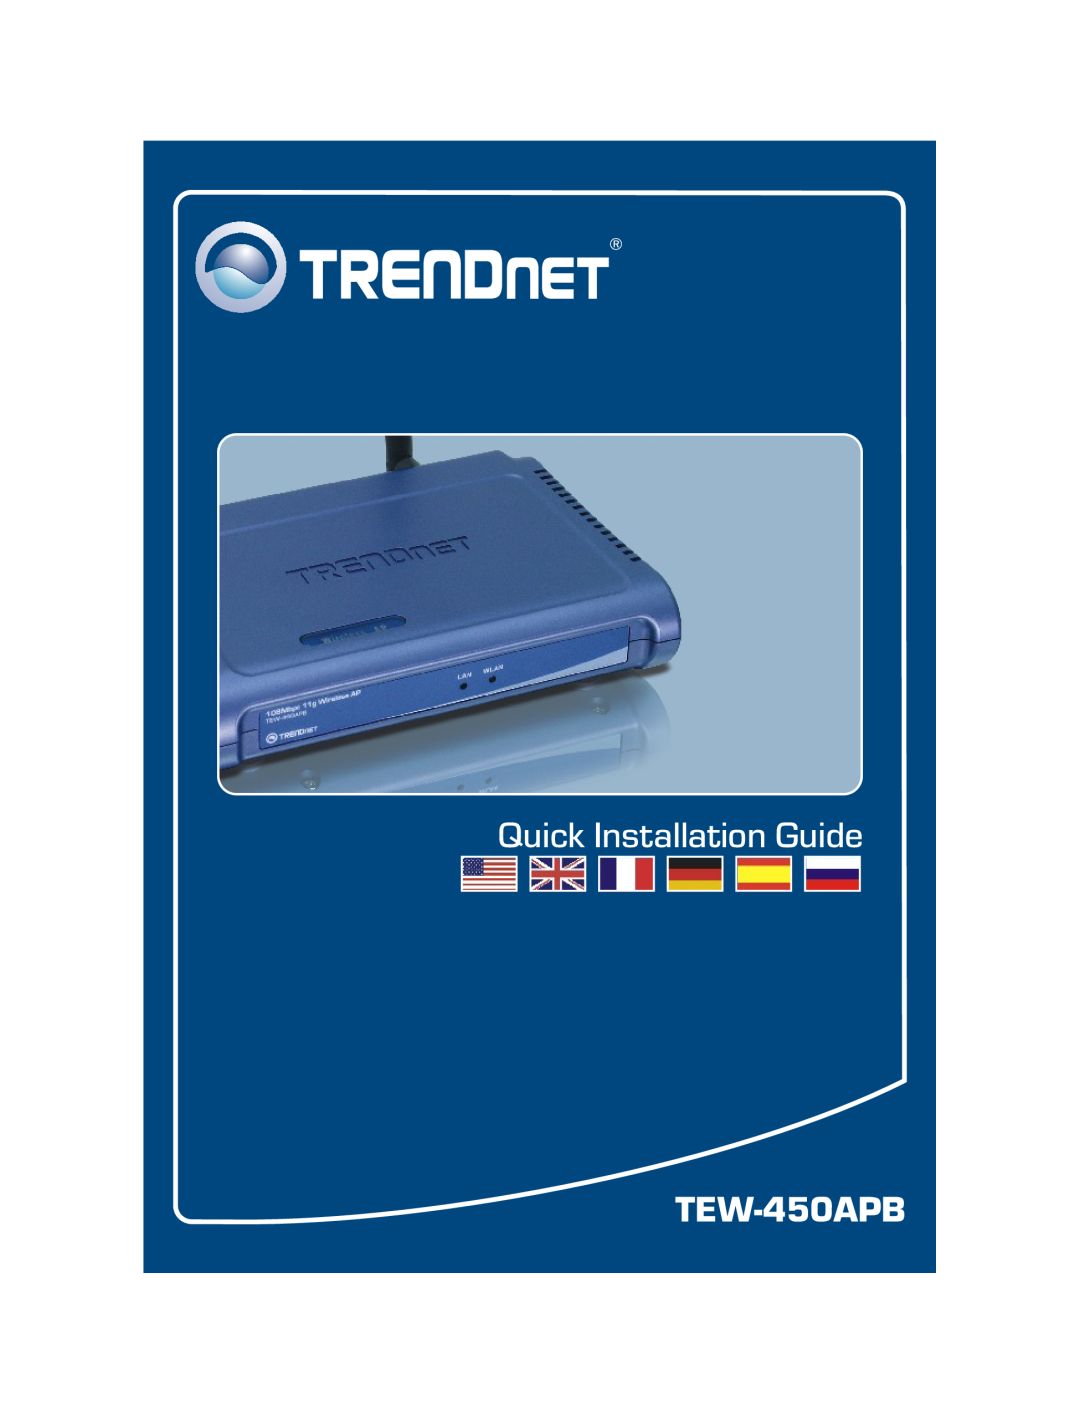 TRENDnet Wireless Access Point manual Quick Installation Guide, TEW-450APB 